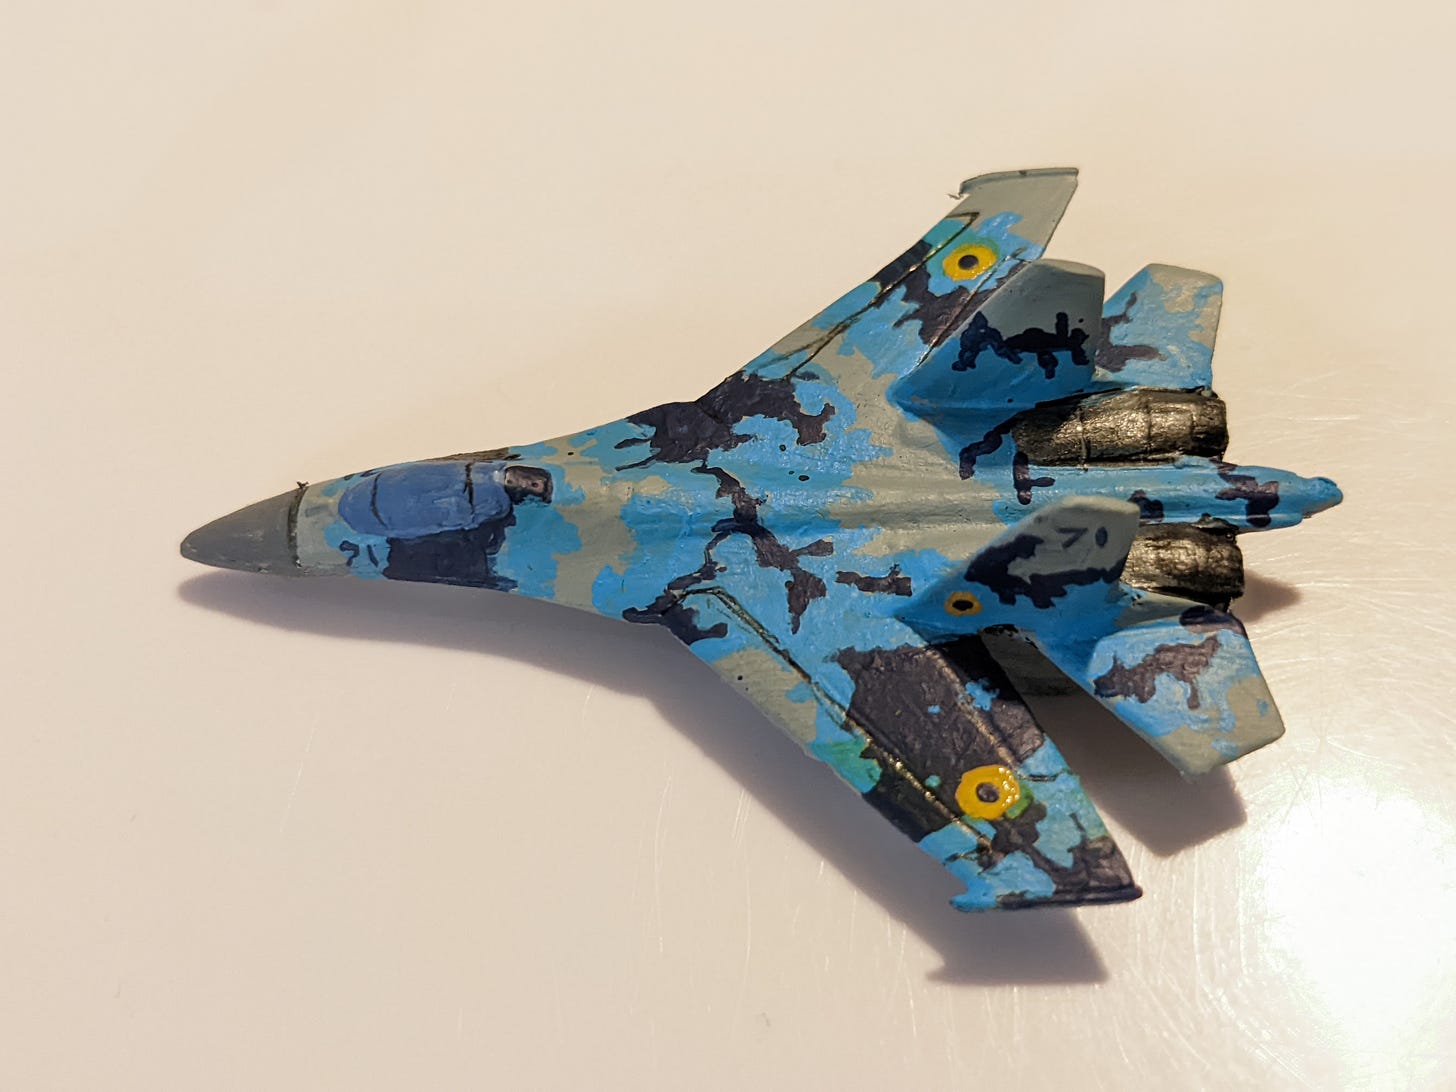 A 6 mm model of an Ukrainian SU-27 fighter jet painted in Ukrainian air force colours.